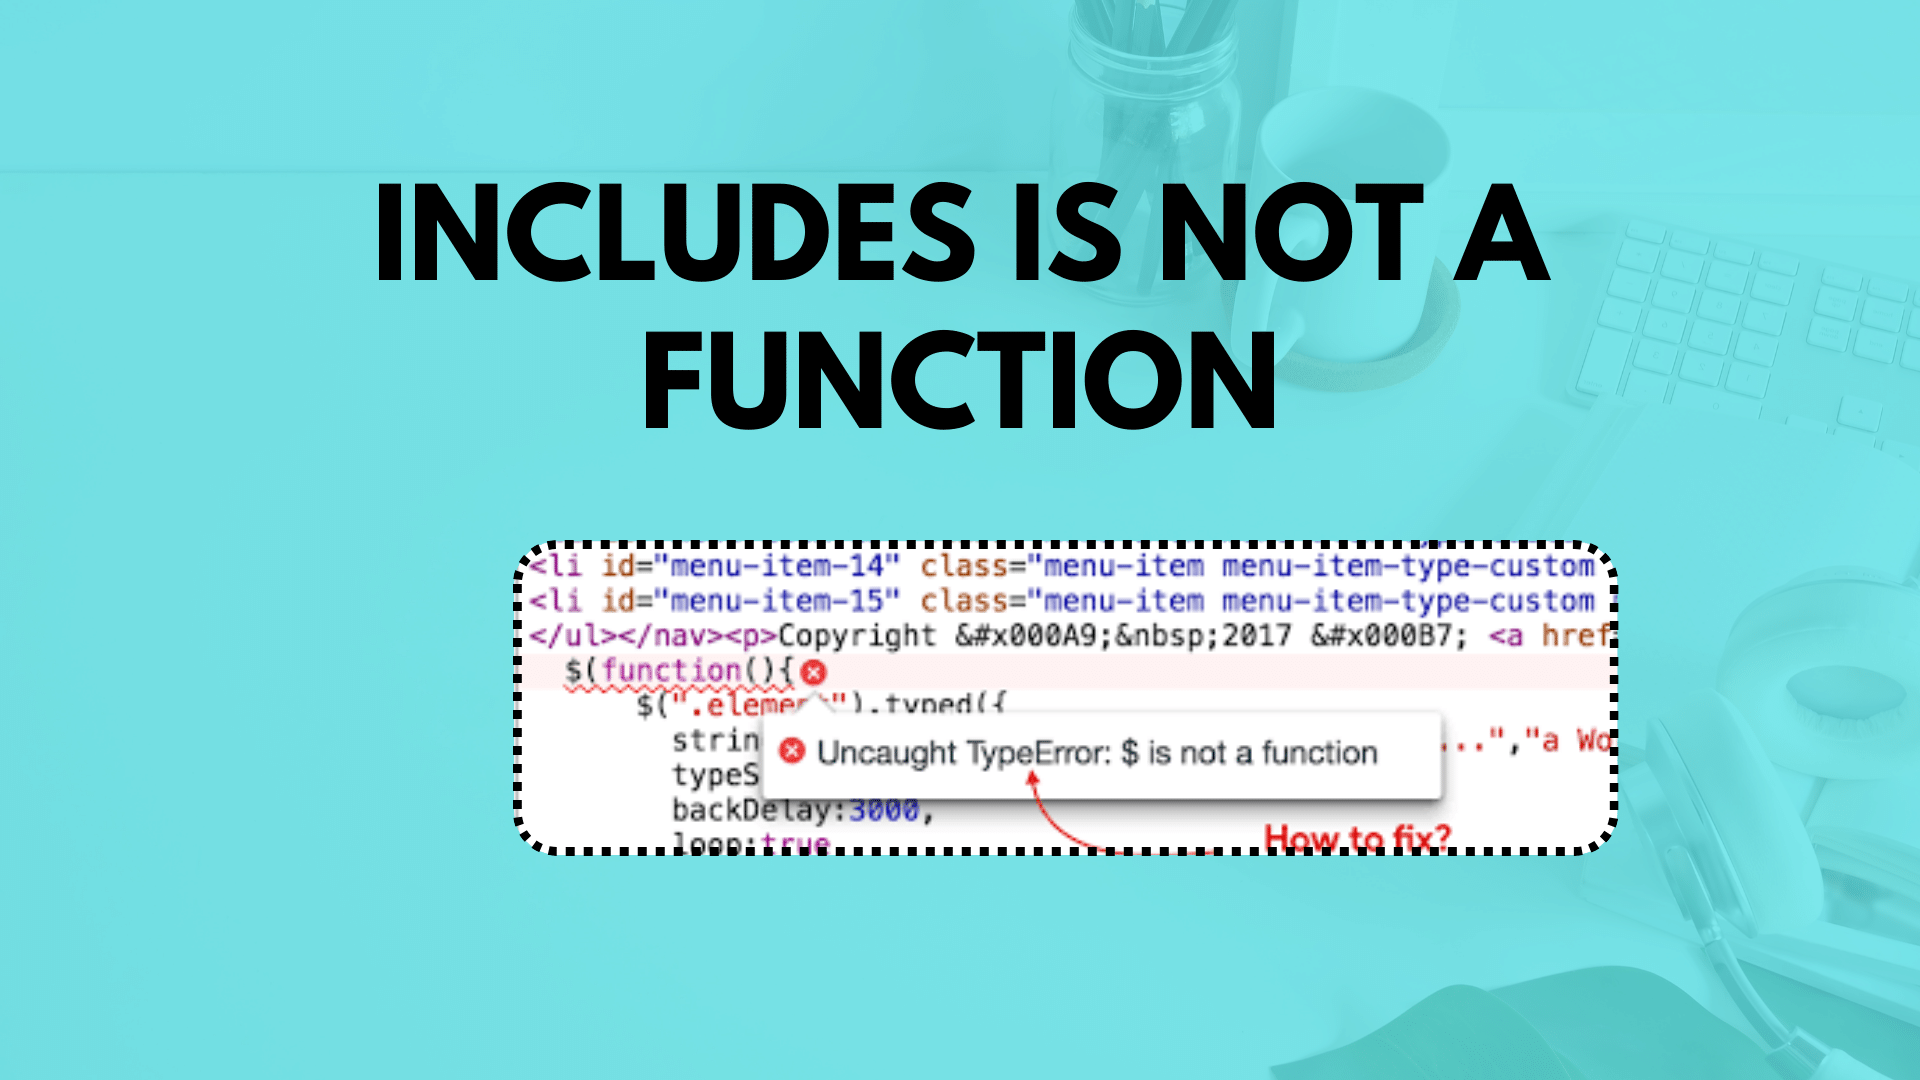 Includes is not a function